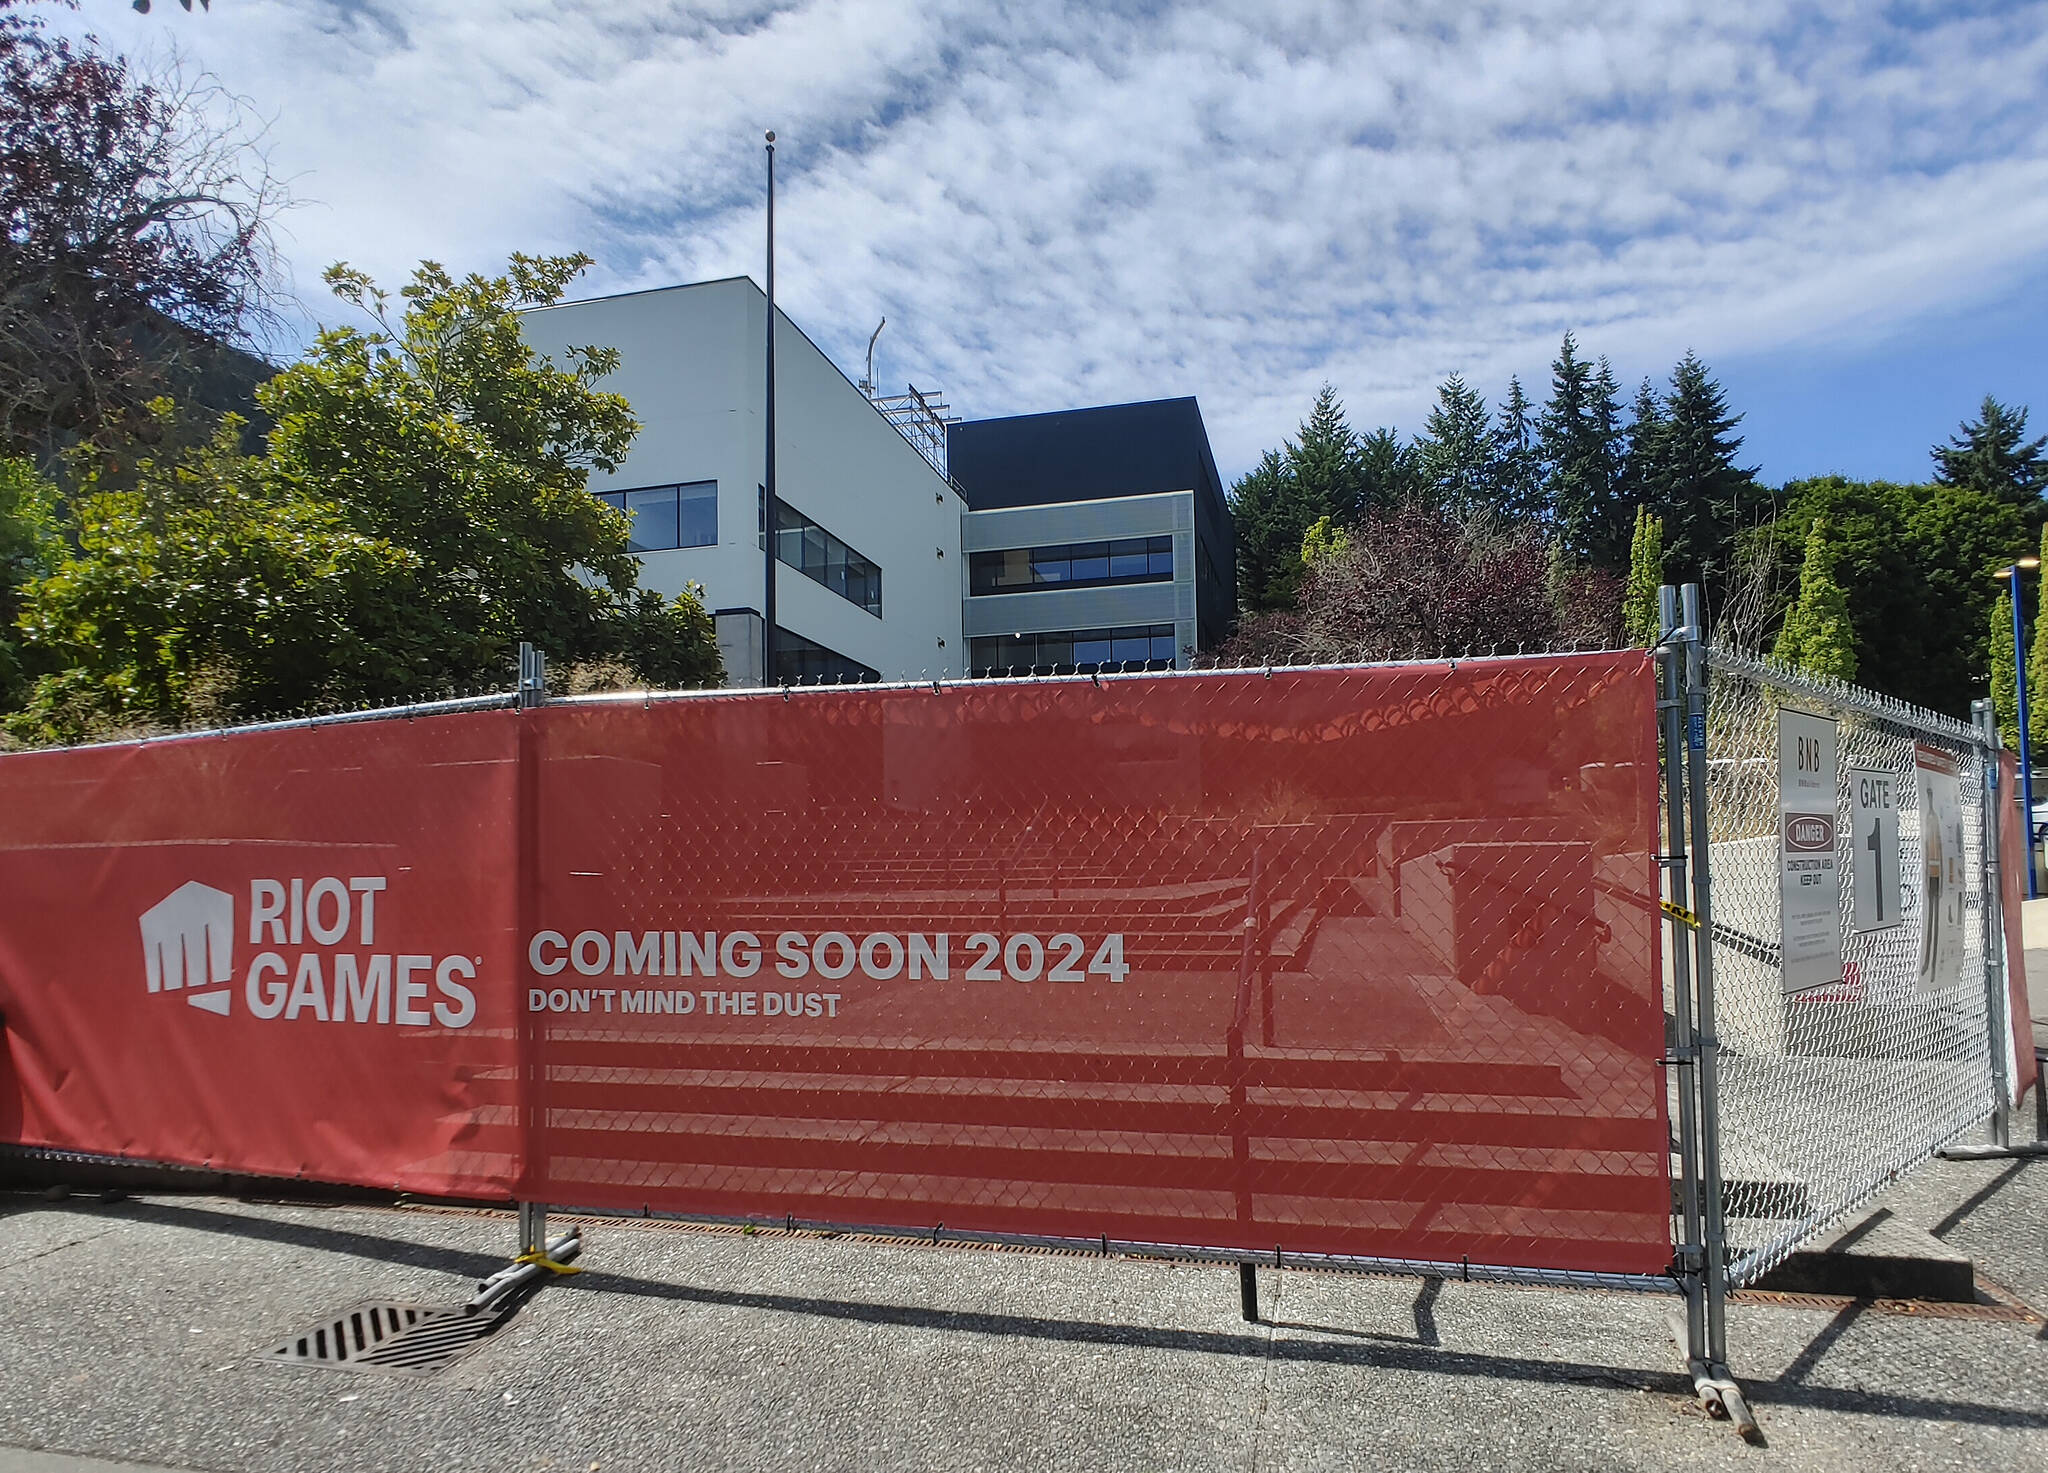 The Riot Games building peeks out from behind fencing at 3003 77th Ave. SE. Andy Nystrom/ staff photo